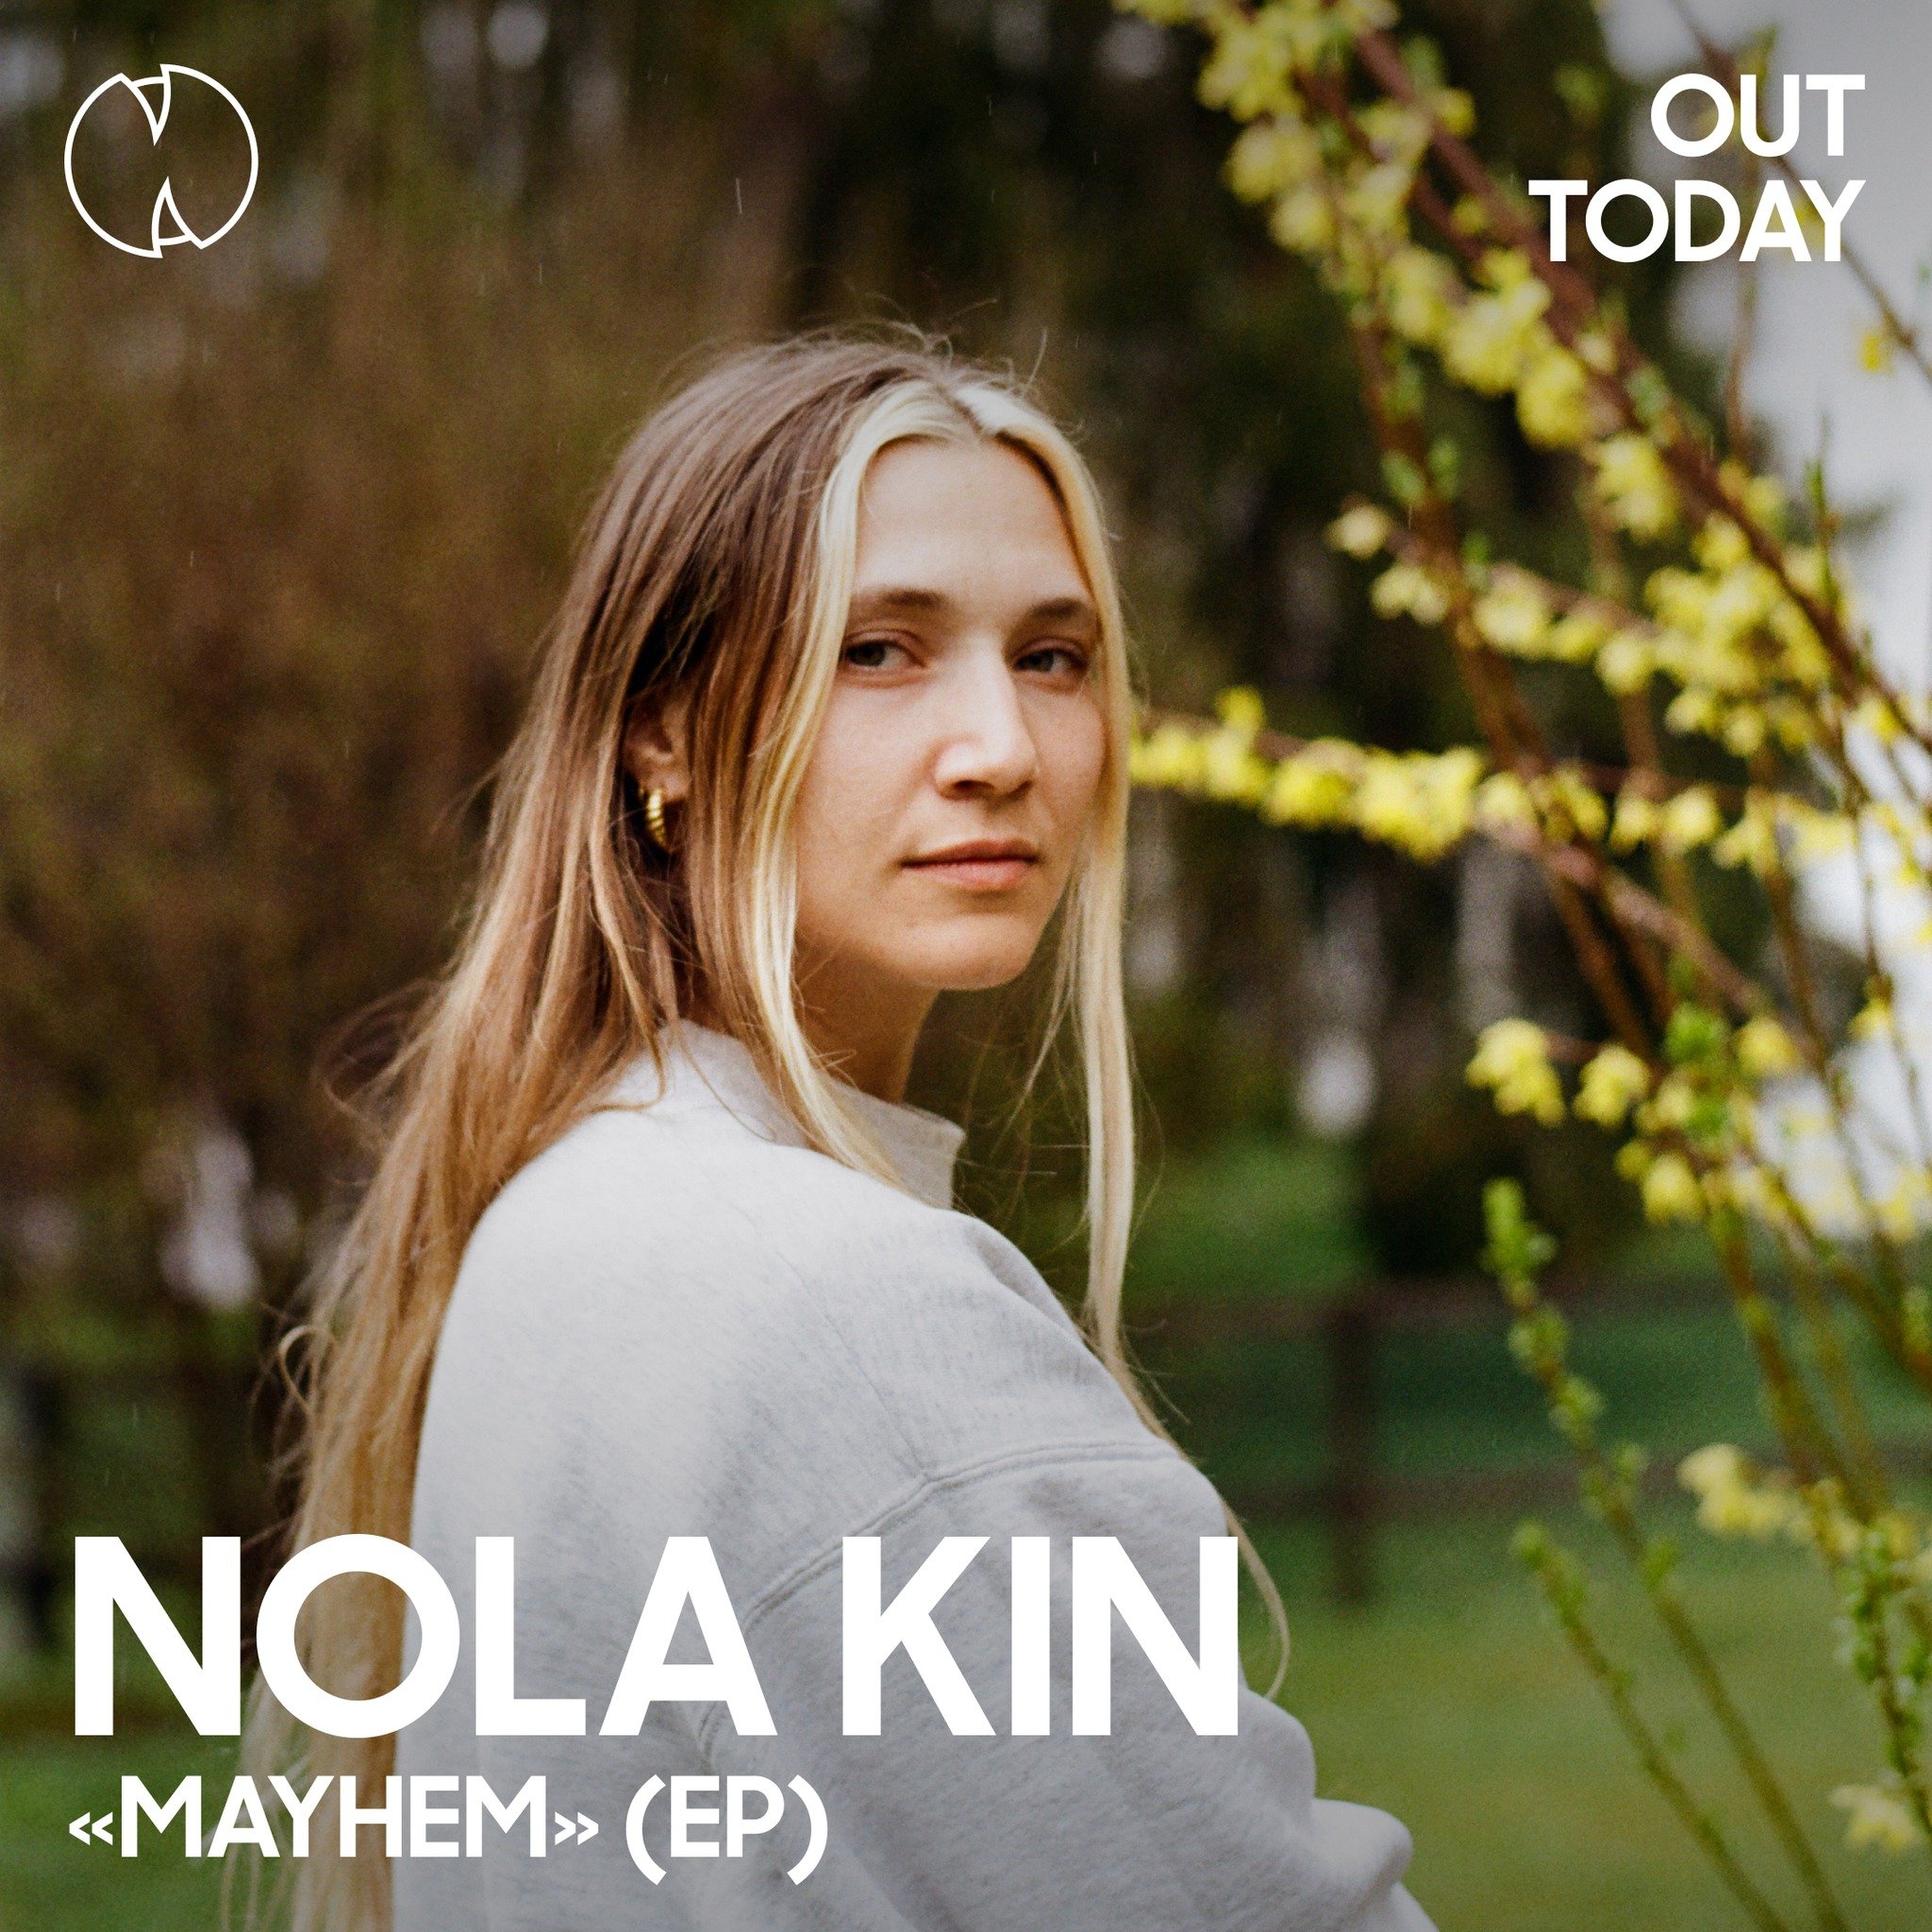 💿 ᴏᴜᴛ ᴛᴏᴅᴀʏ: Today's release day is a busy one! Congratulations to @nola__kin for releasing her EP &quot;Mayhem&quot;. An exploration of intricate landscapes of psychic and emotional mayhem from five unique perspectives. We're proud to work alongsid